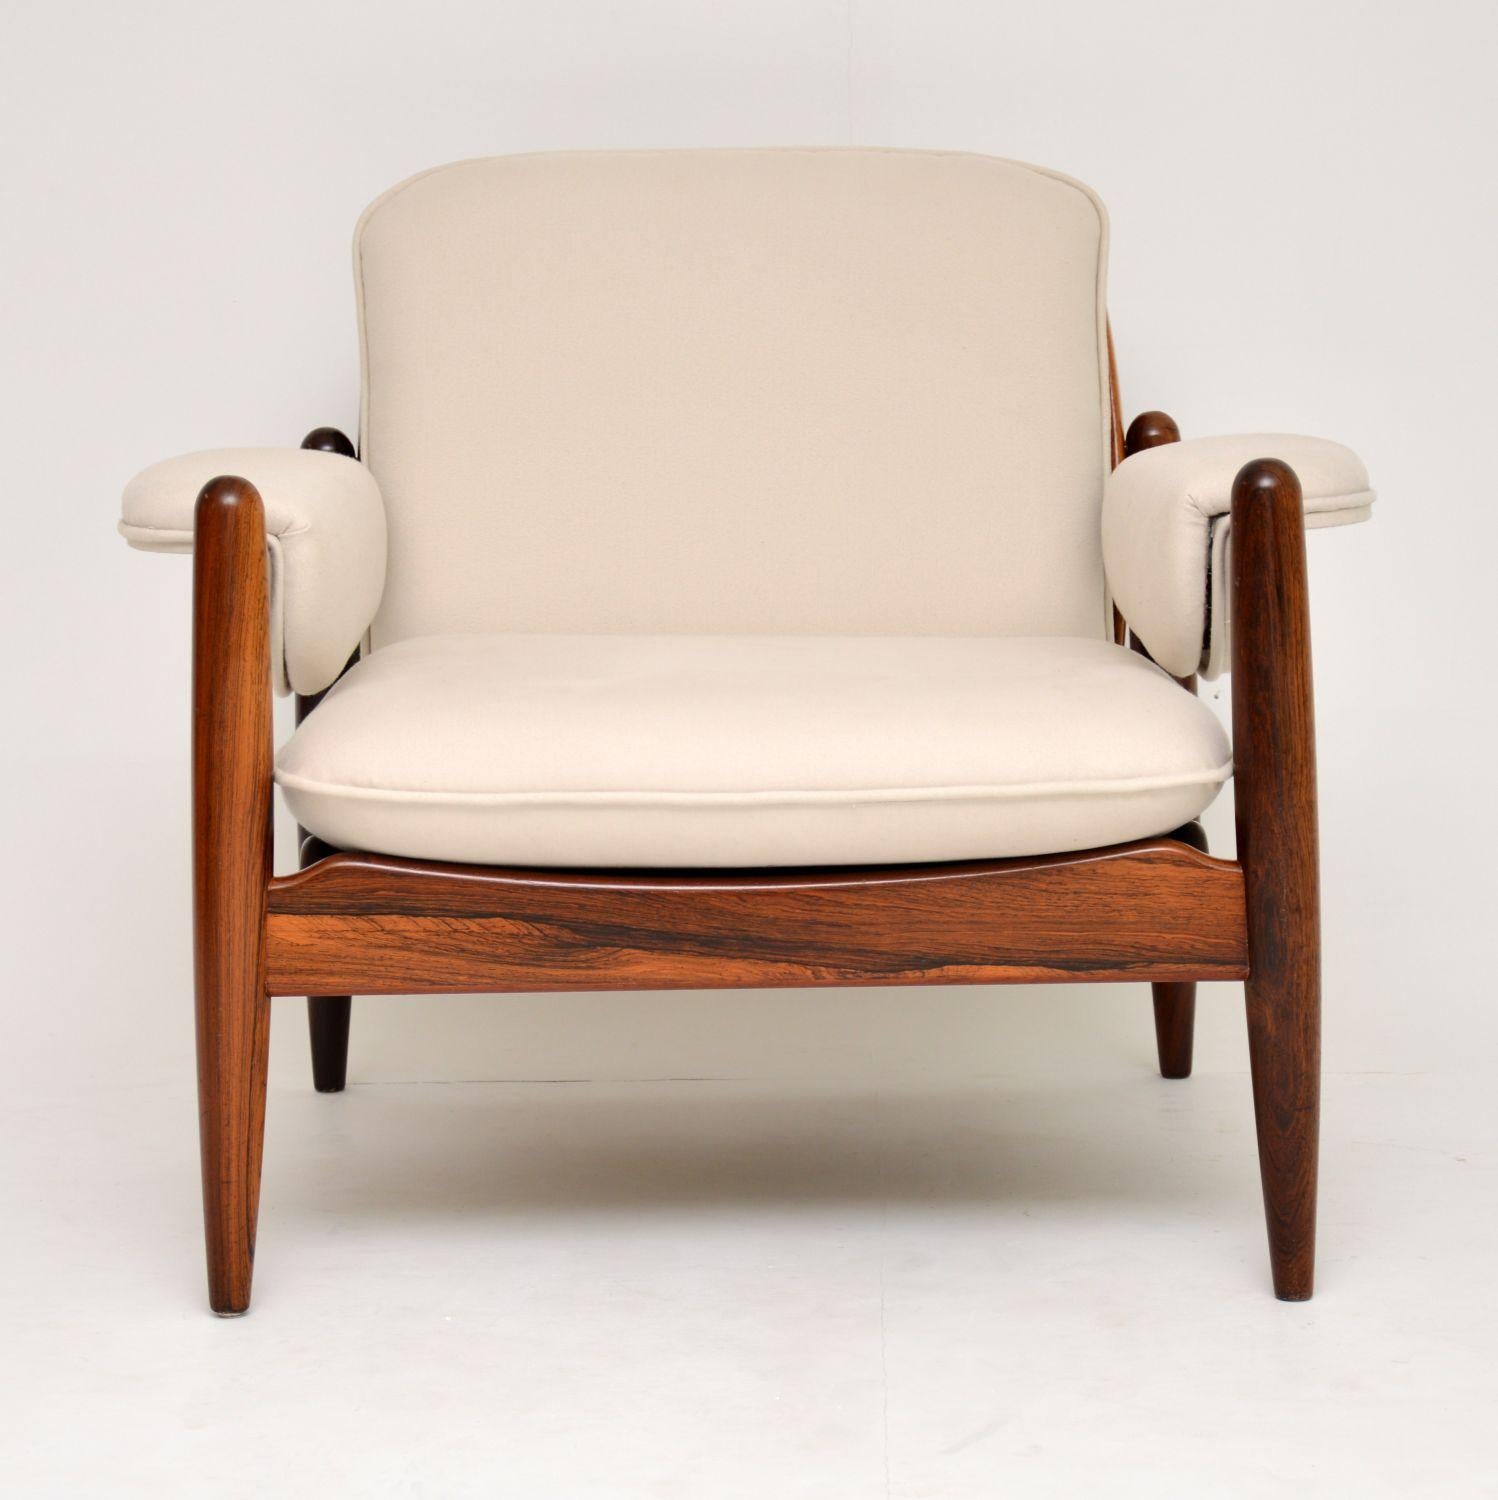 A stunning and extremely well made armchair, this was made in Denmark, it dates from the 1960s. It’s of outstanding quality, it’s sturdy and very comfortable, with beautiful wood grain patterns throughout. The design is particularly striking from